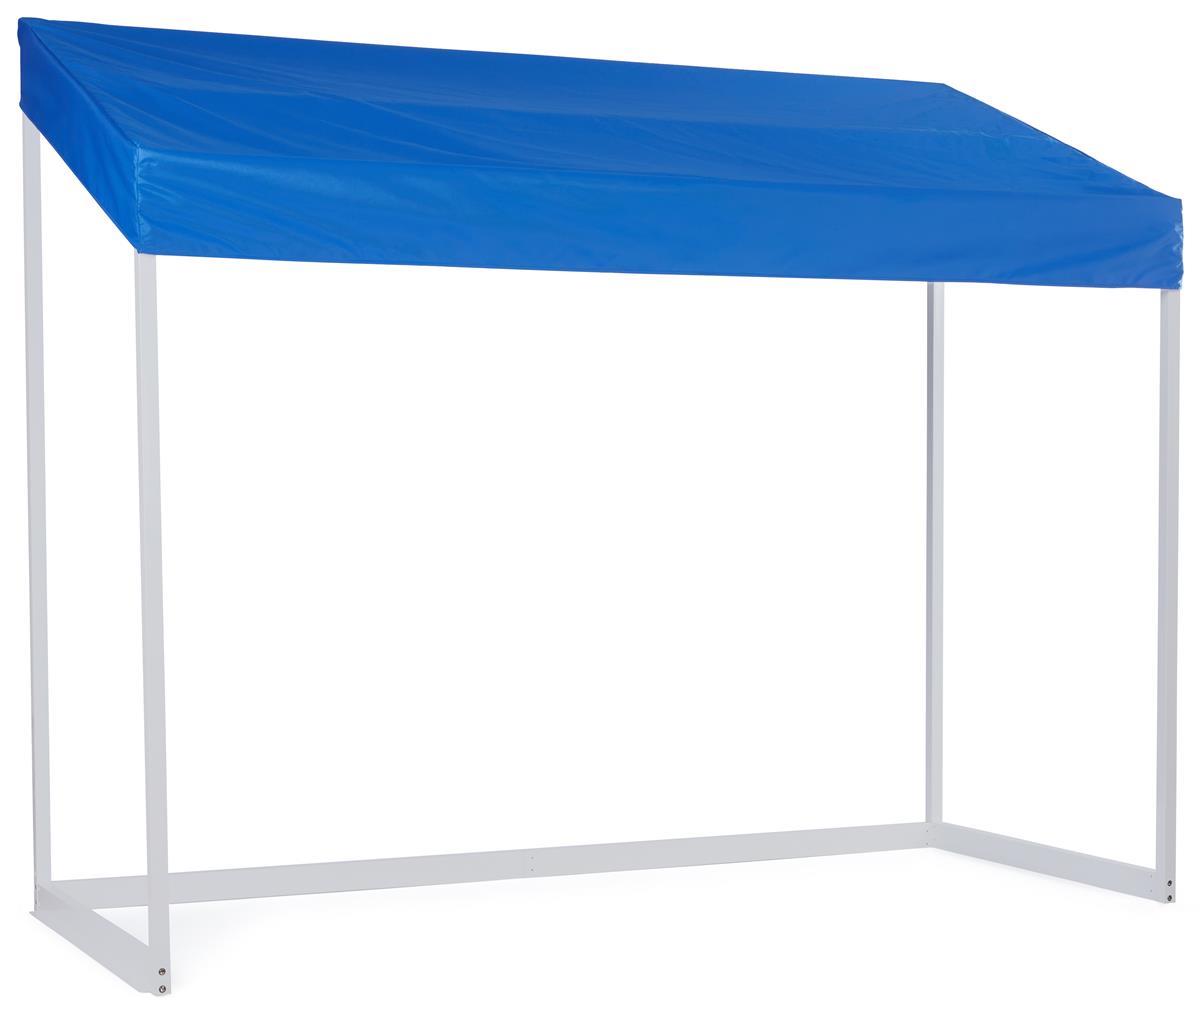 Table top canopy with blue polyester awning 